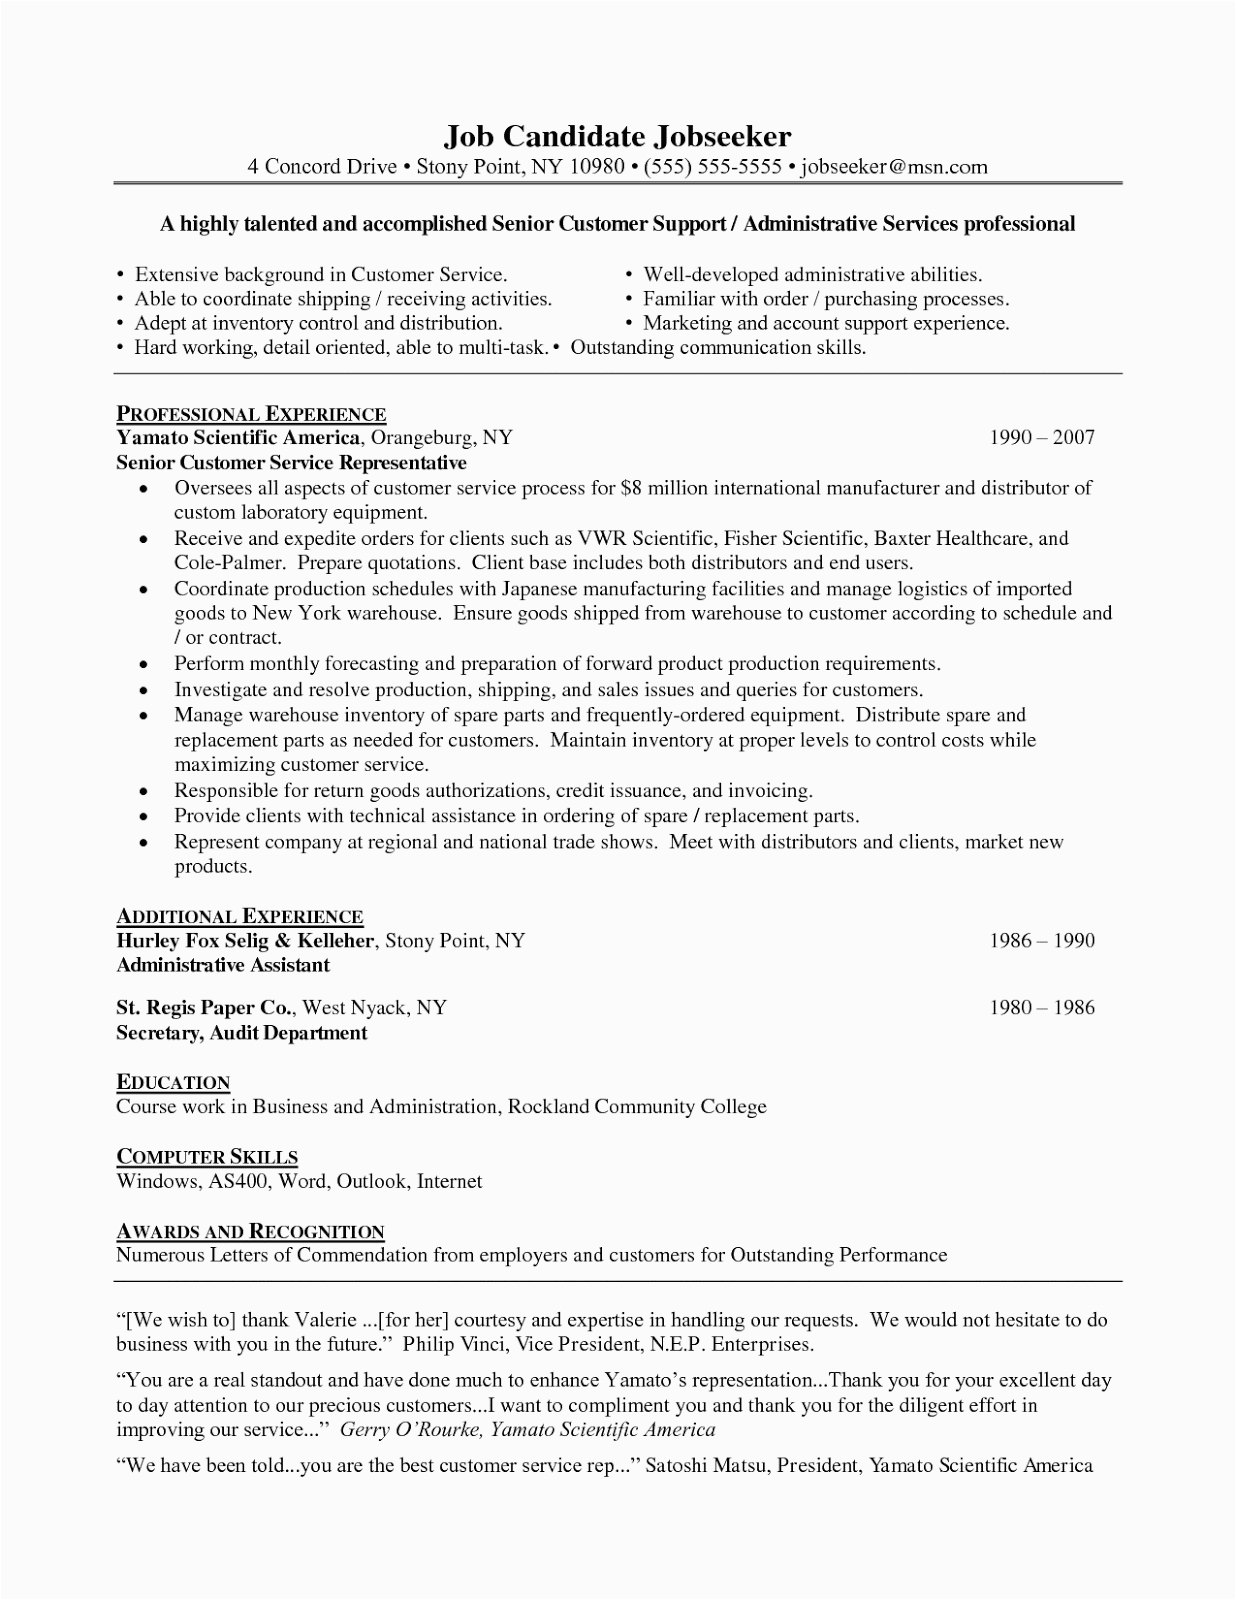 Sample Resume Summary Statement for Customer Service Career Objective for Customer Service Resume